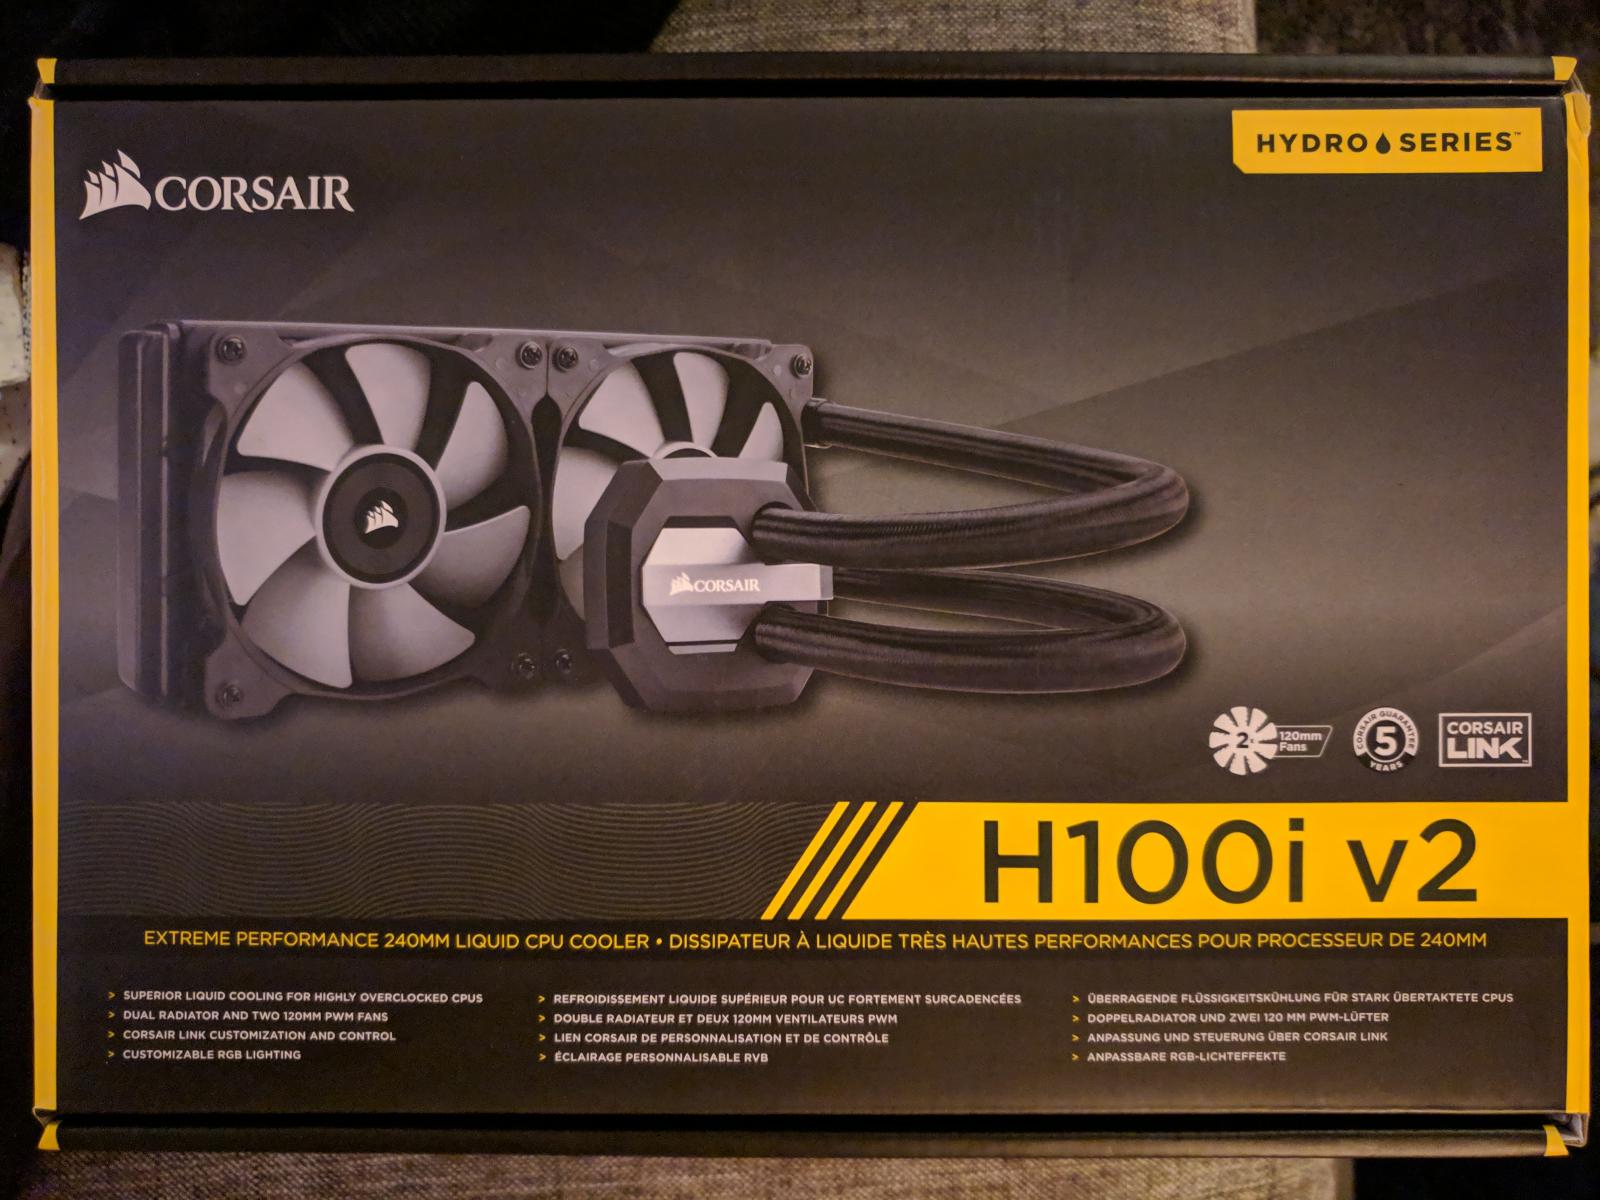 For sale Corsair Hydro Series H100i v2 Extreme Performance Liquid CPU Cooler